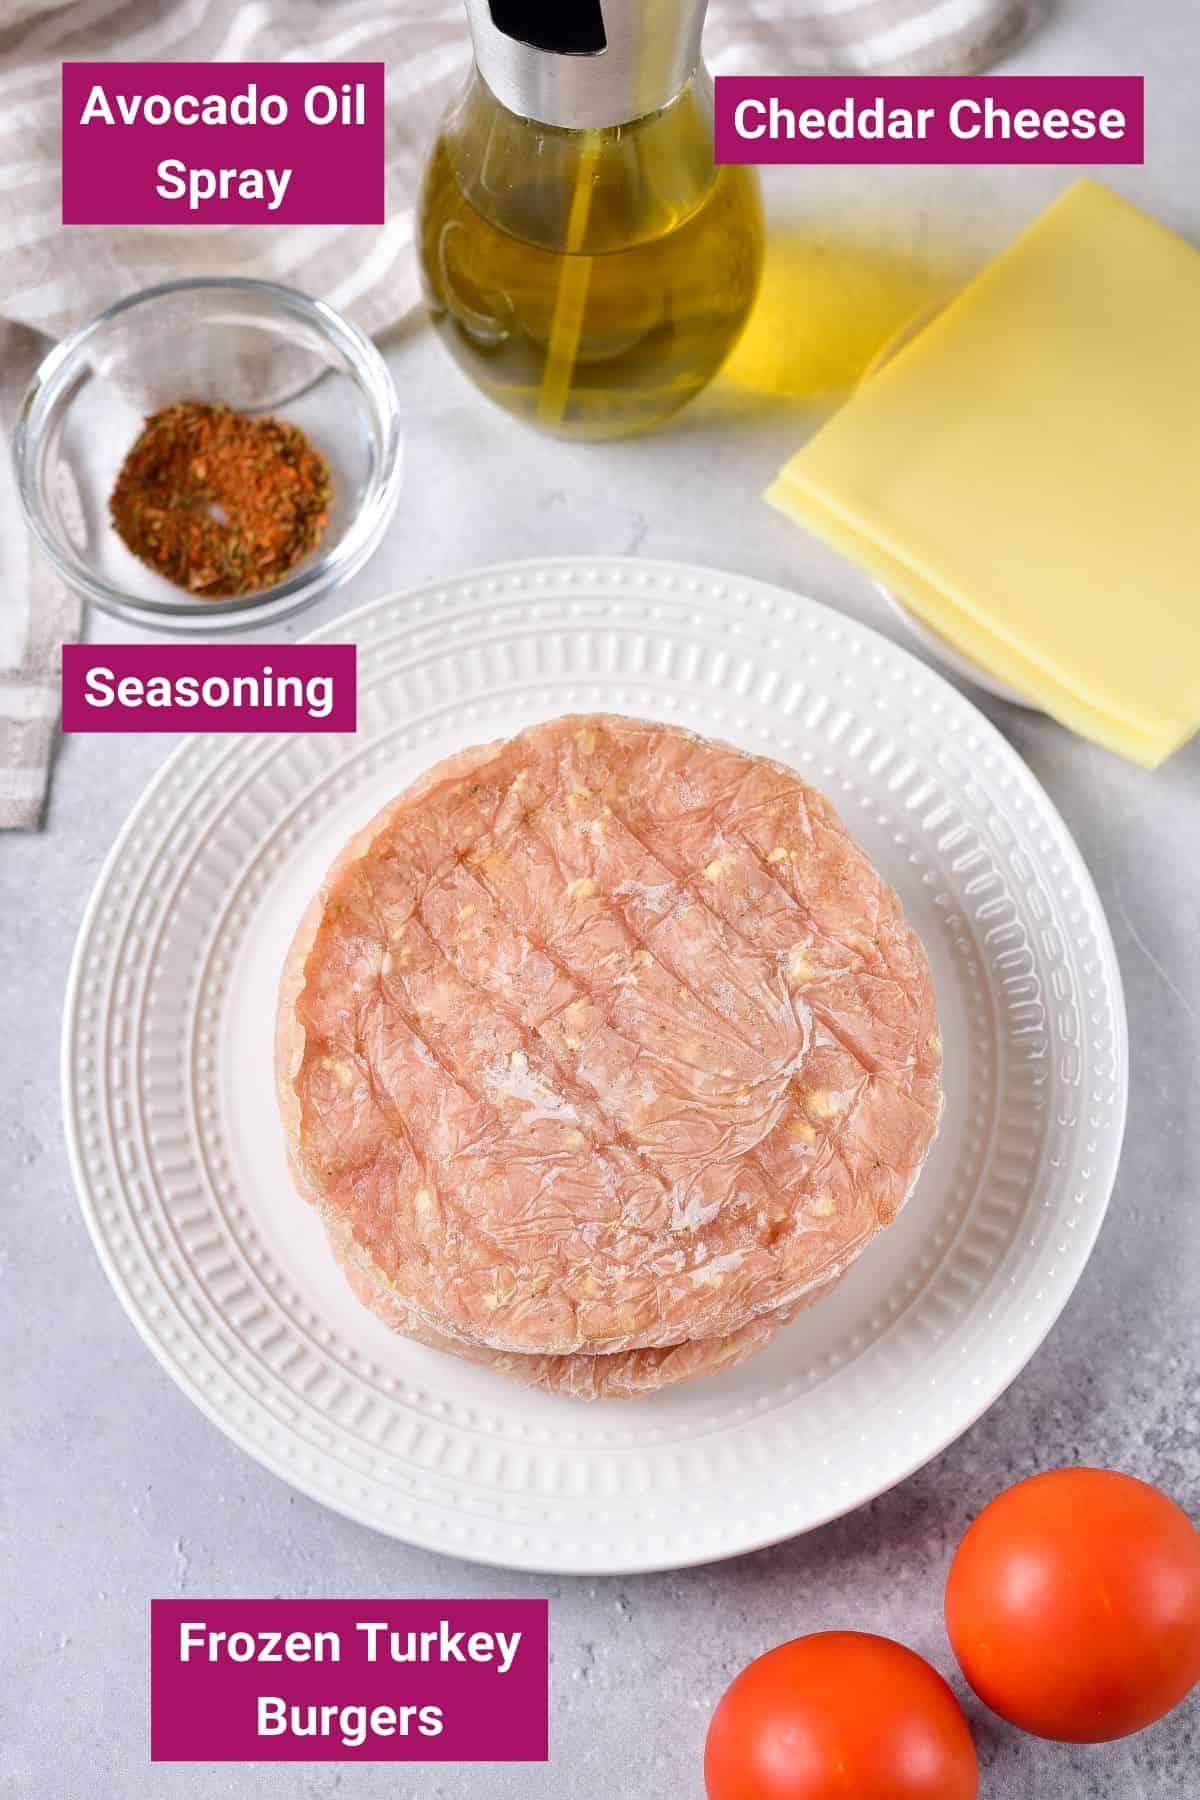 ingredients to make frozen turkey burger patties in an air fryer on a plate: frozen turkey burgers, avocado oil spray, seasoning and cheddar cheese